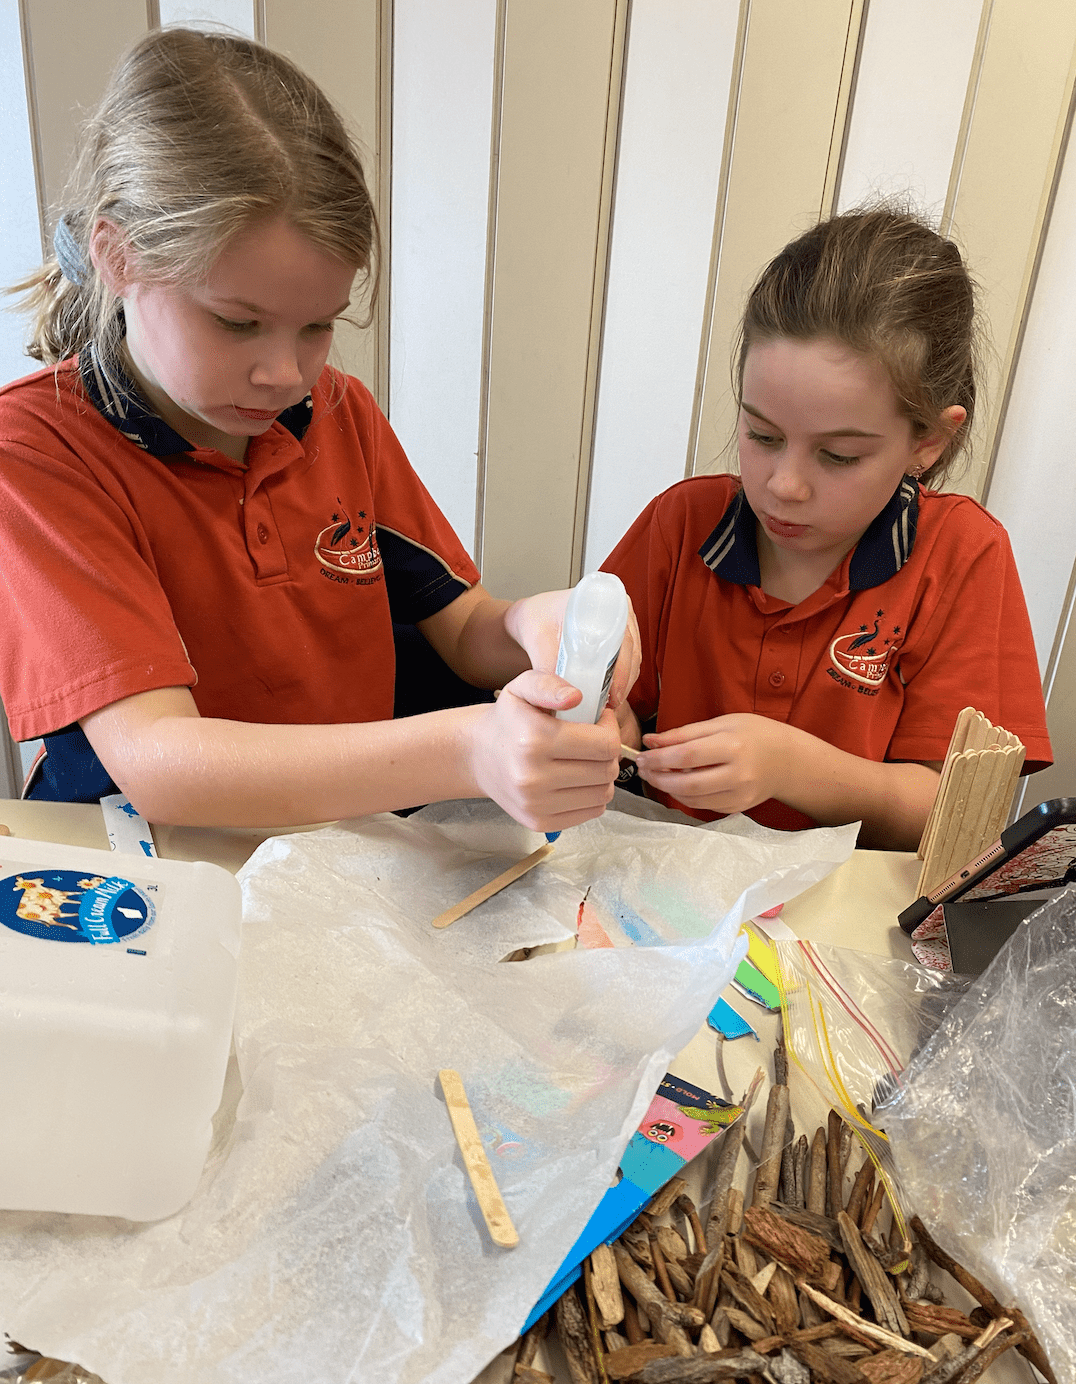 Campbell Primary STEM Activity